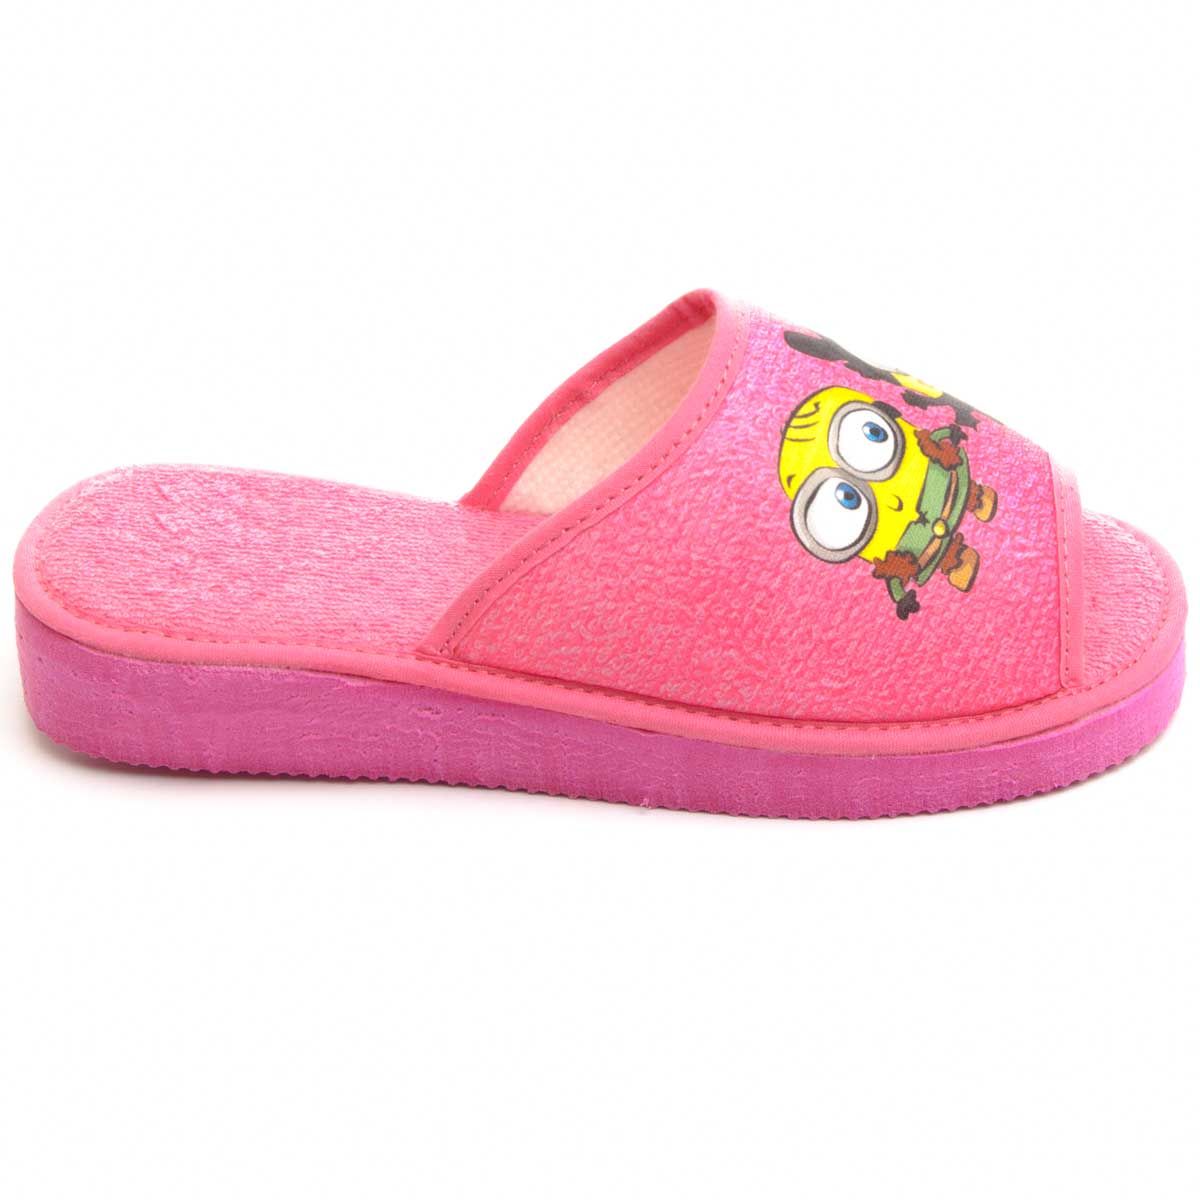 Northome Comfortable Slipper in Pink